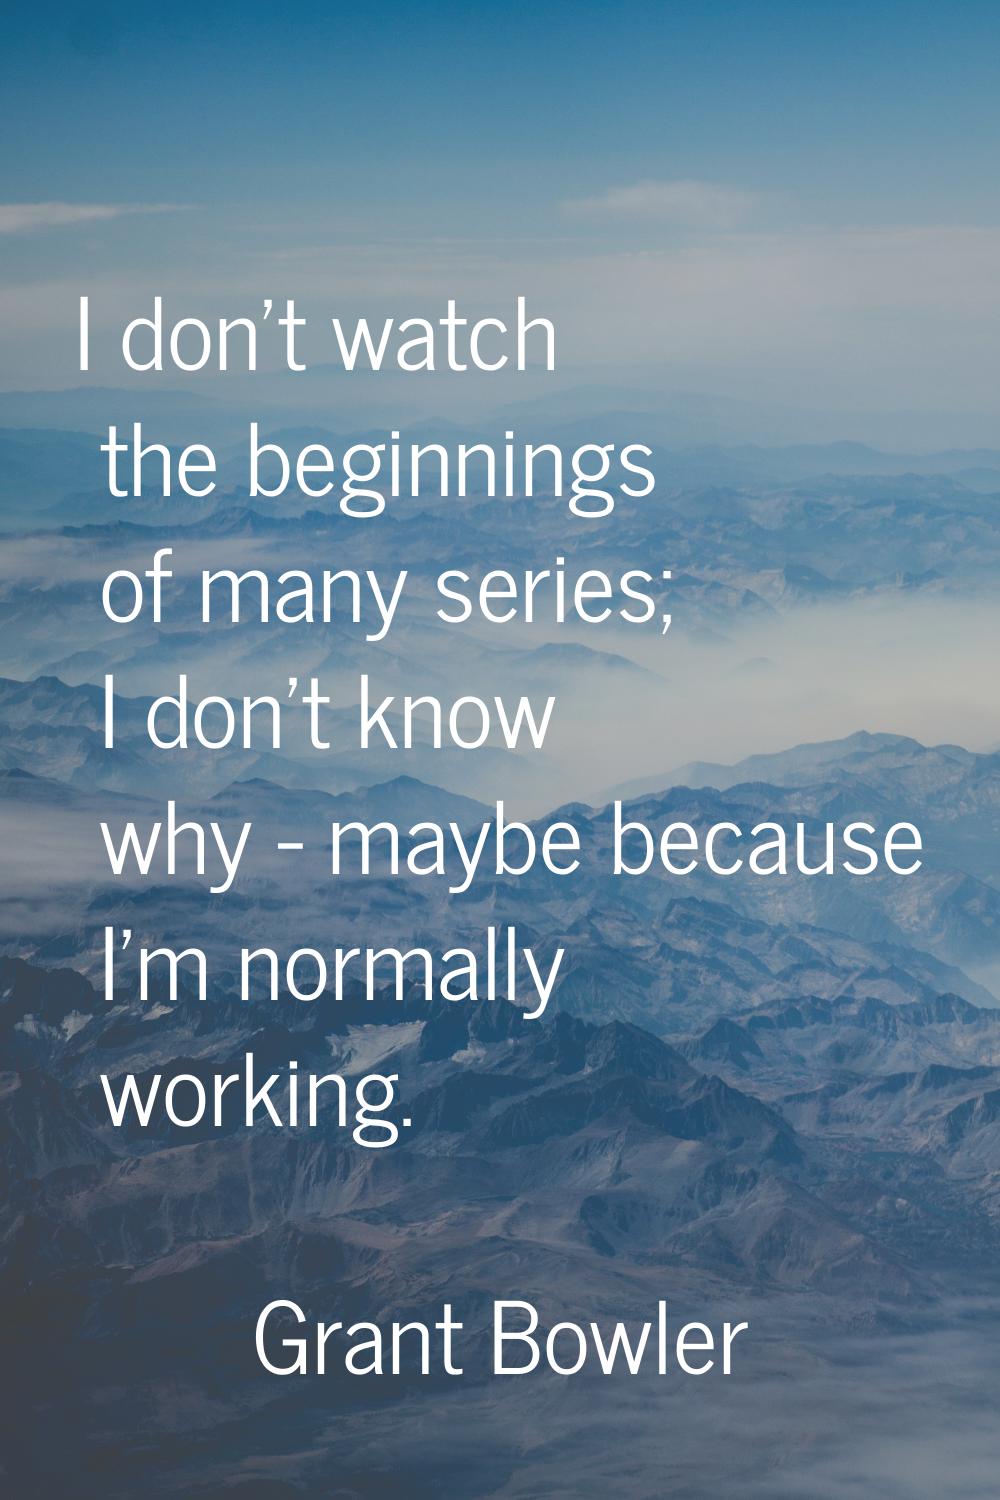 I don't watch the beginnings of many series; I don't know why - maybe because I'm normally working.